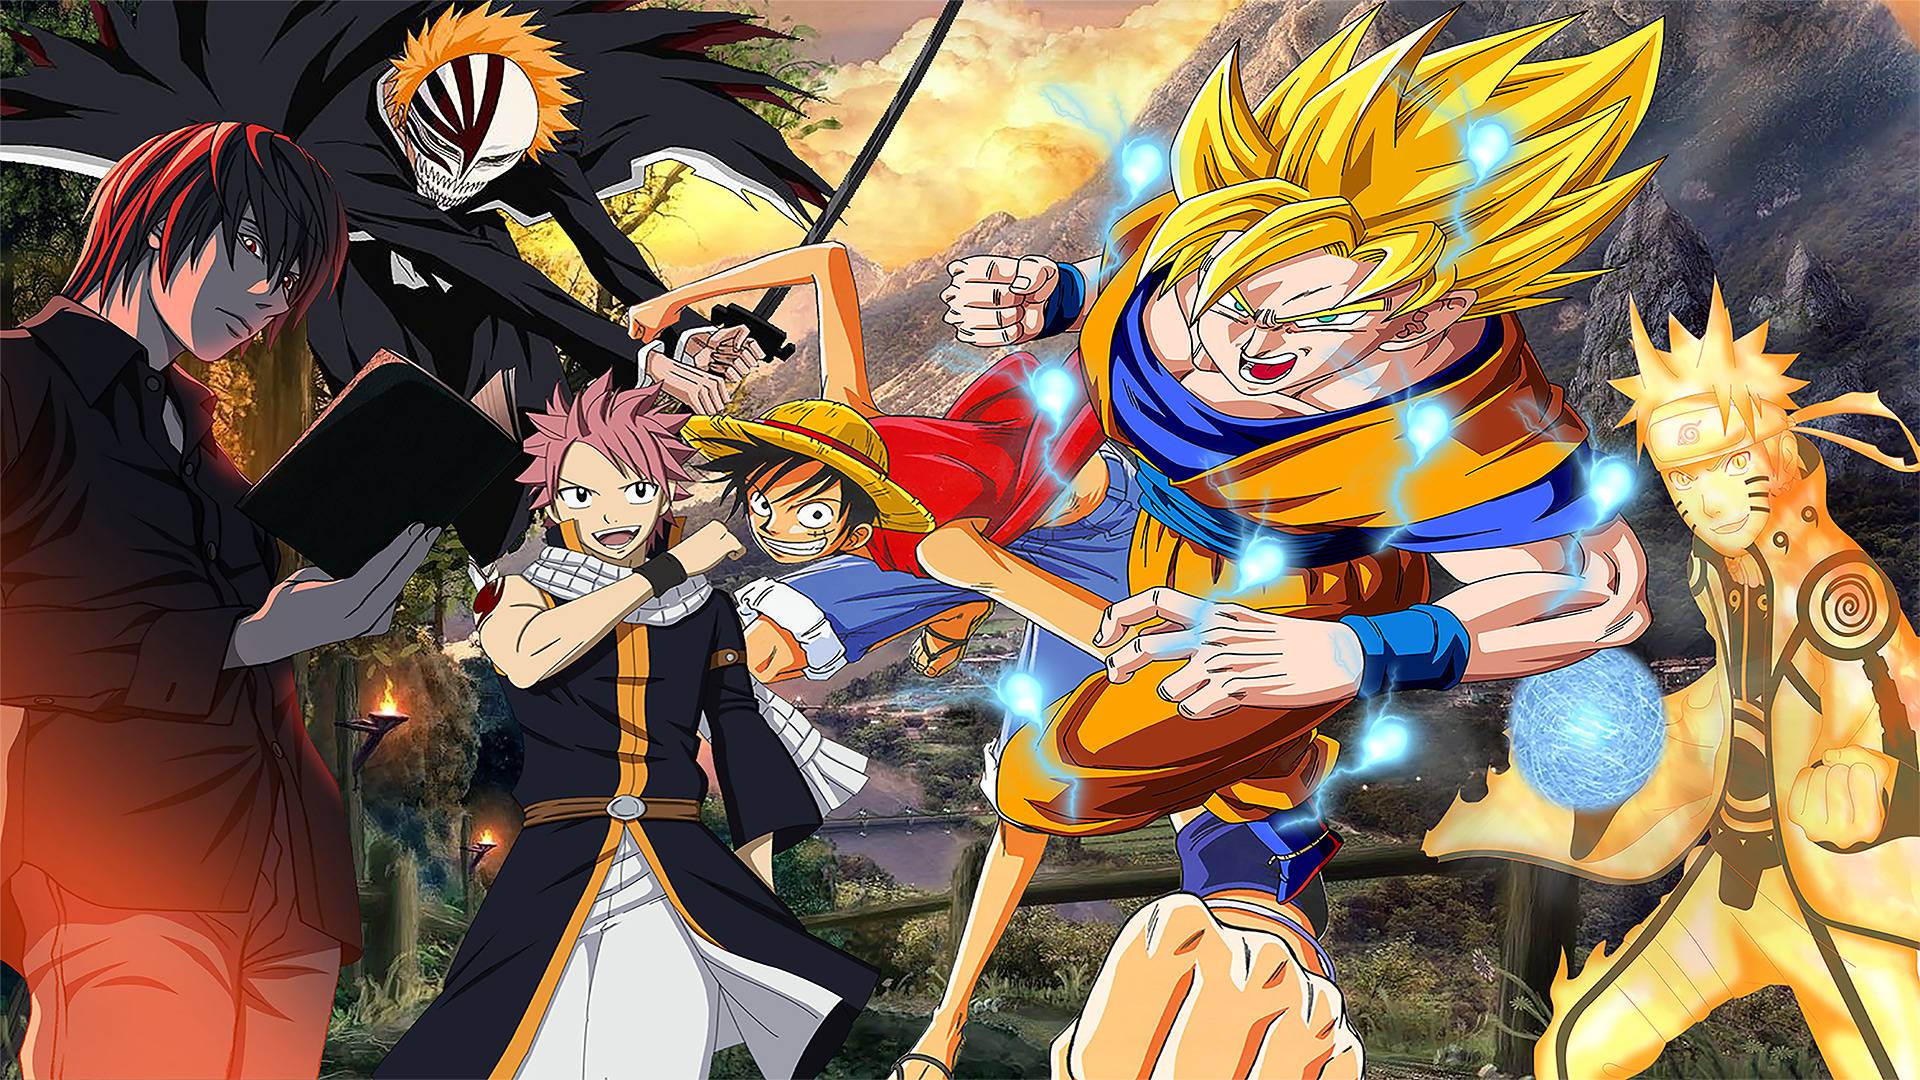 Anime Characters Anime Hd Wallpaper 1920x1080 11058 Fairy Tail